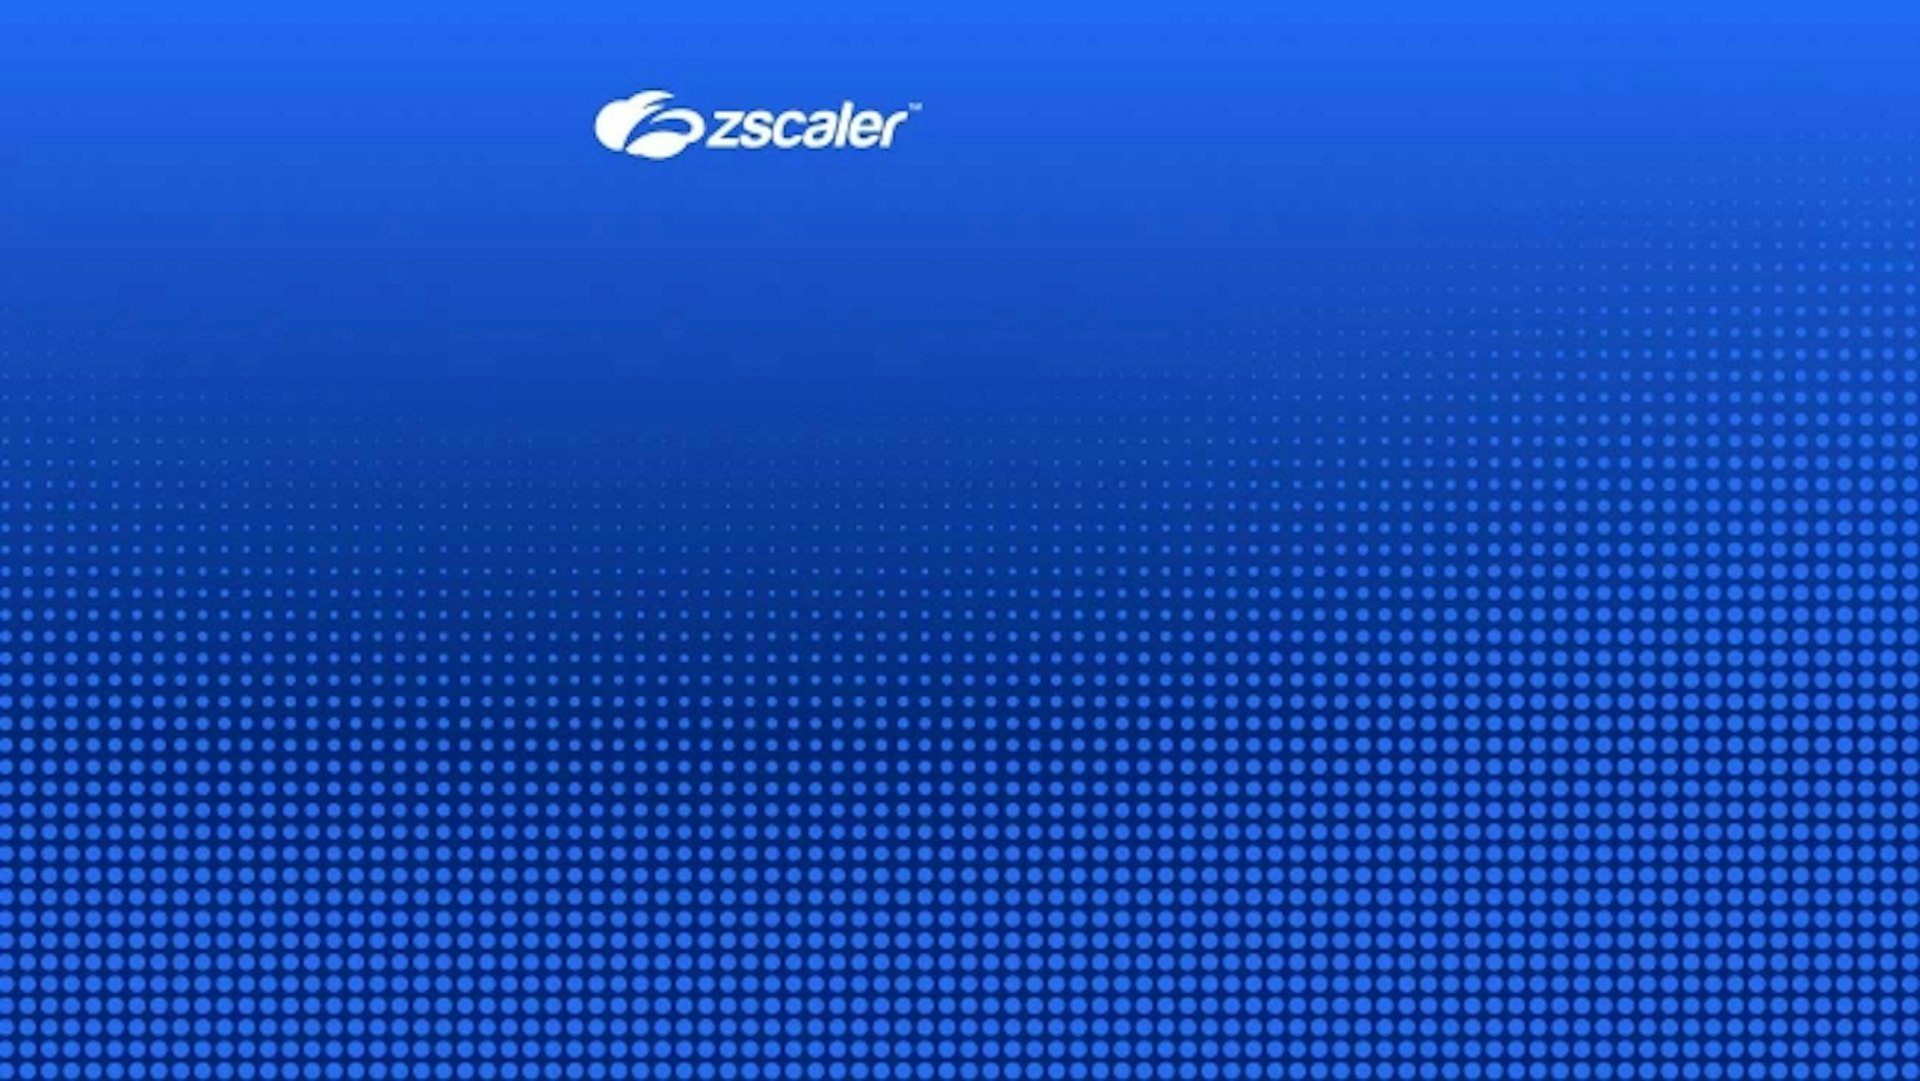 Zscaler Data Protection: Optical Character Recognition